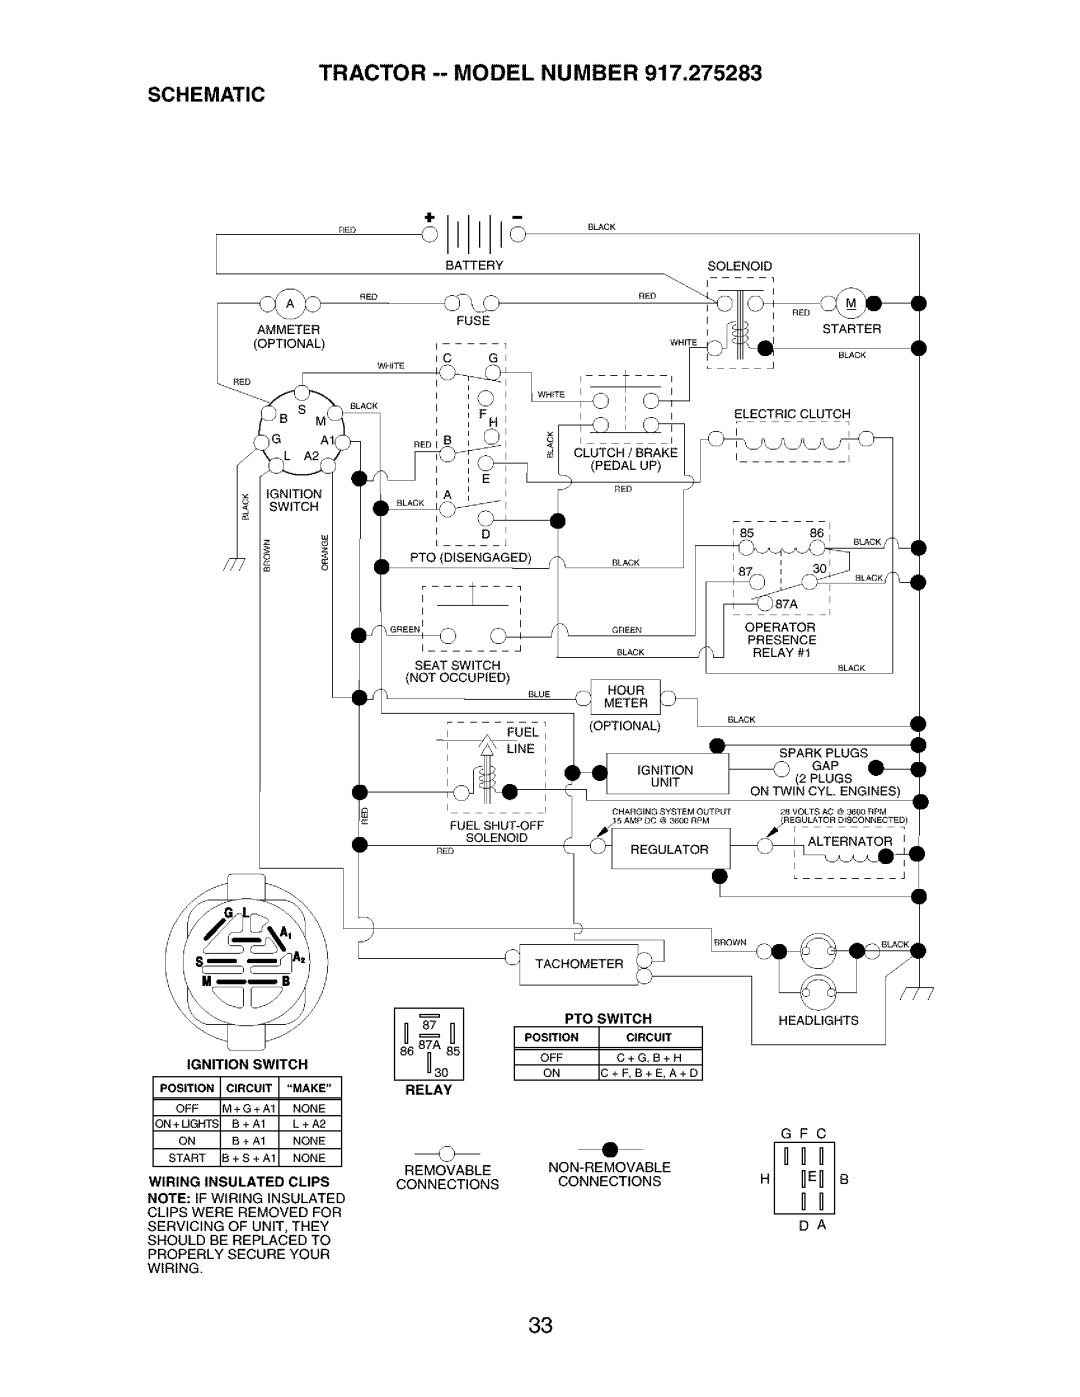 Craftsman 917.275283 owner manual o,.=FR, _.,,, _LECTR,CCLUT, _:s._ _, _,,_Eo_;;_X_, Fuse, Tractor --Model Number Schematic 